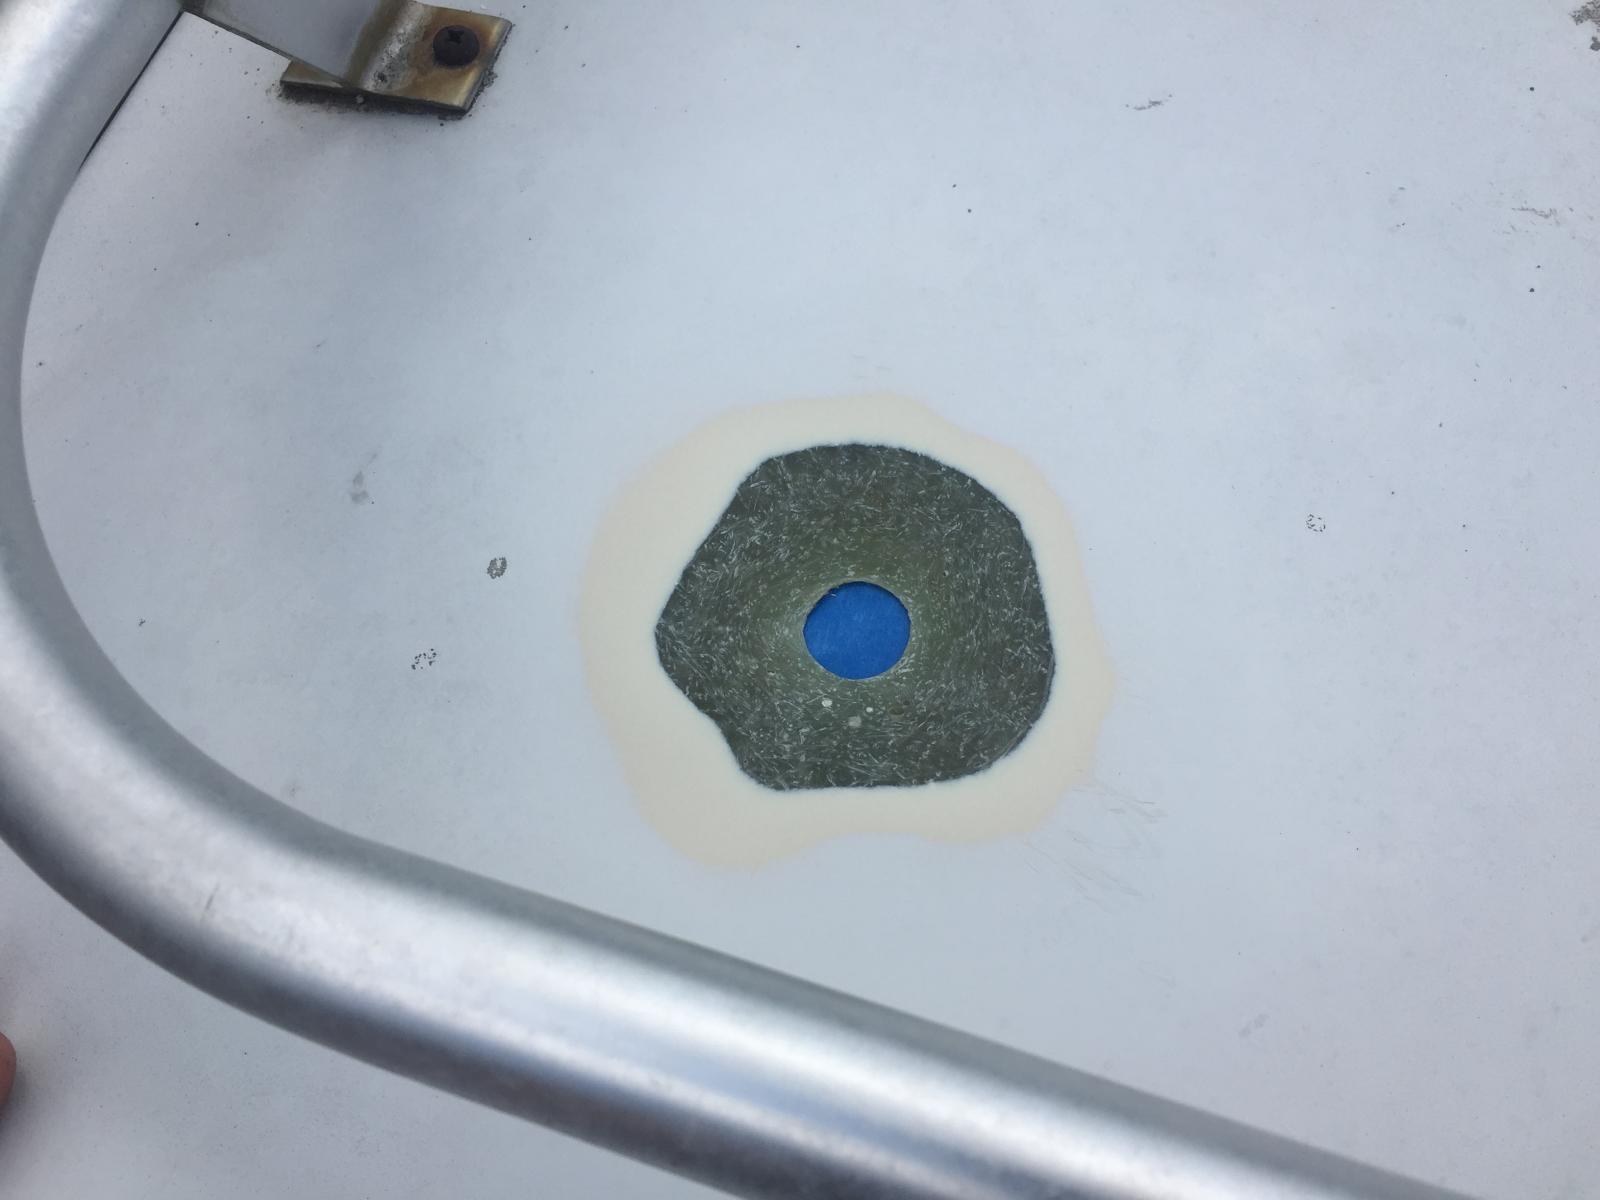 There was a hole in the fiberglass high top roof that an old TV antenna cable ran through. I'm sanding and prepping it to patch with fiberglass and resin. Sanded a tapered circle to fit 4 fiberglass patches of increasing size.